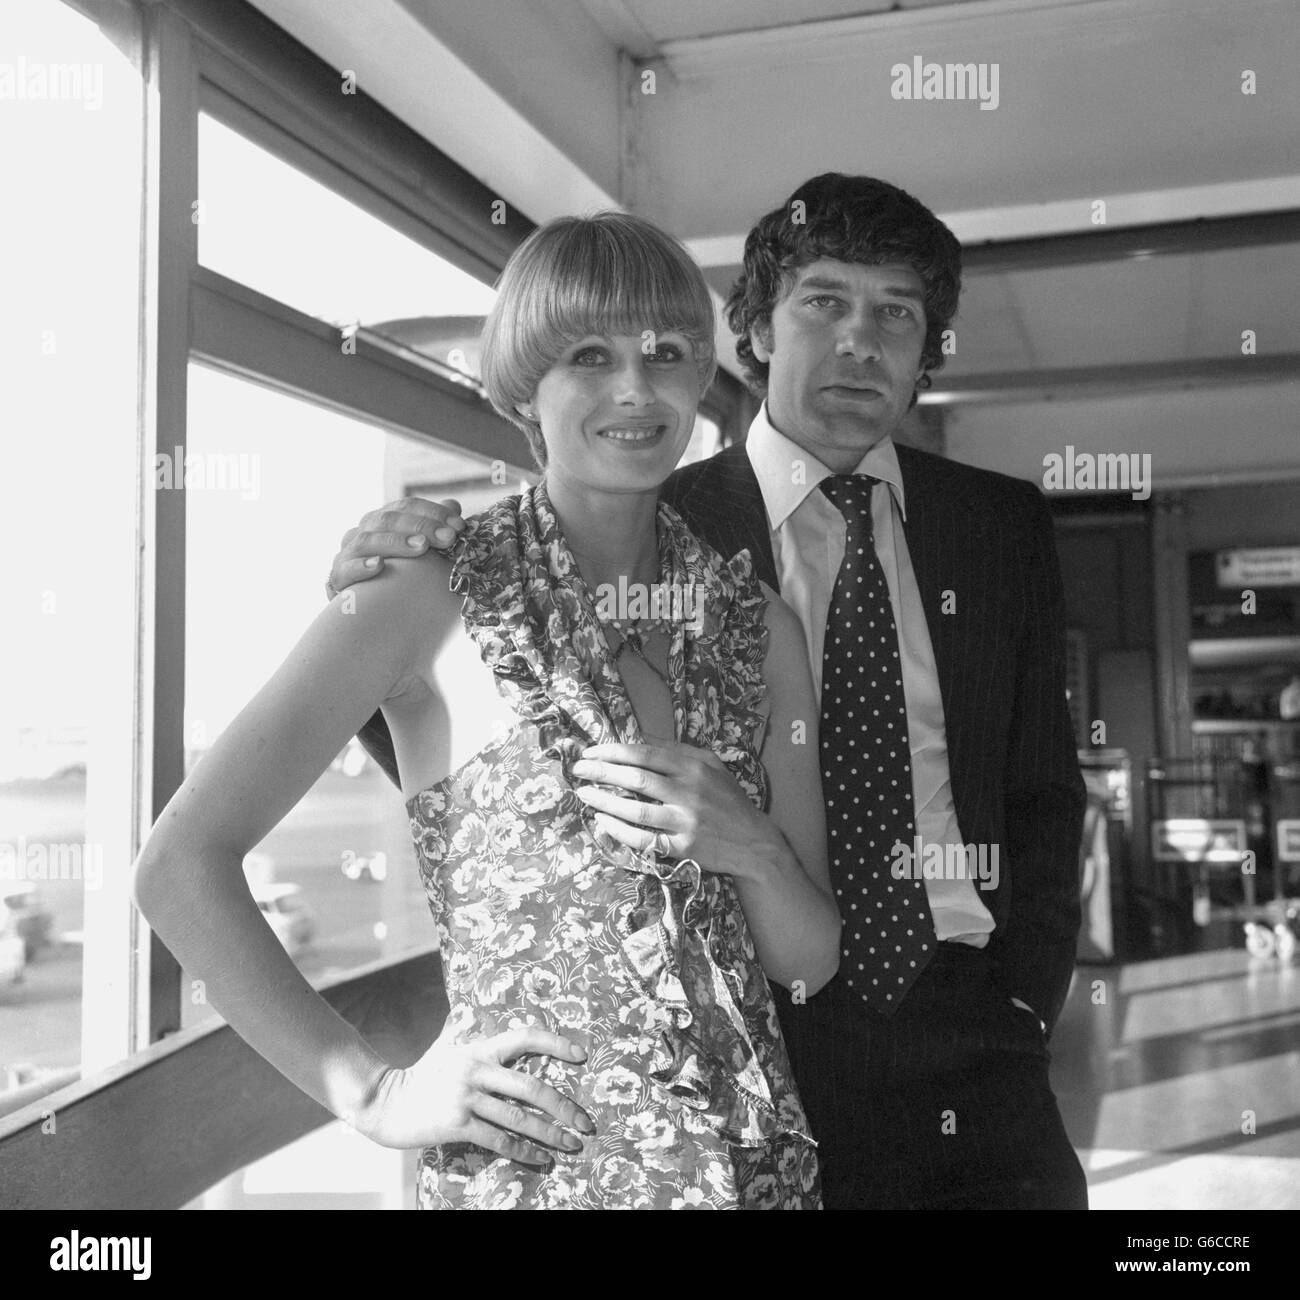 Actress Joanna Lumley and her New Avengers co-star Gareth Hunt at London's Heathrow Airport after they returned from San Francisco, where they have been promoting the new Avengers TV series. Archive-pa176390-1 Stock Photo